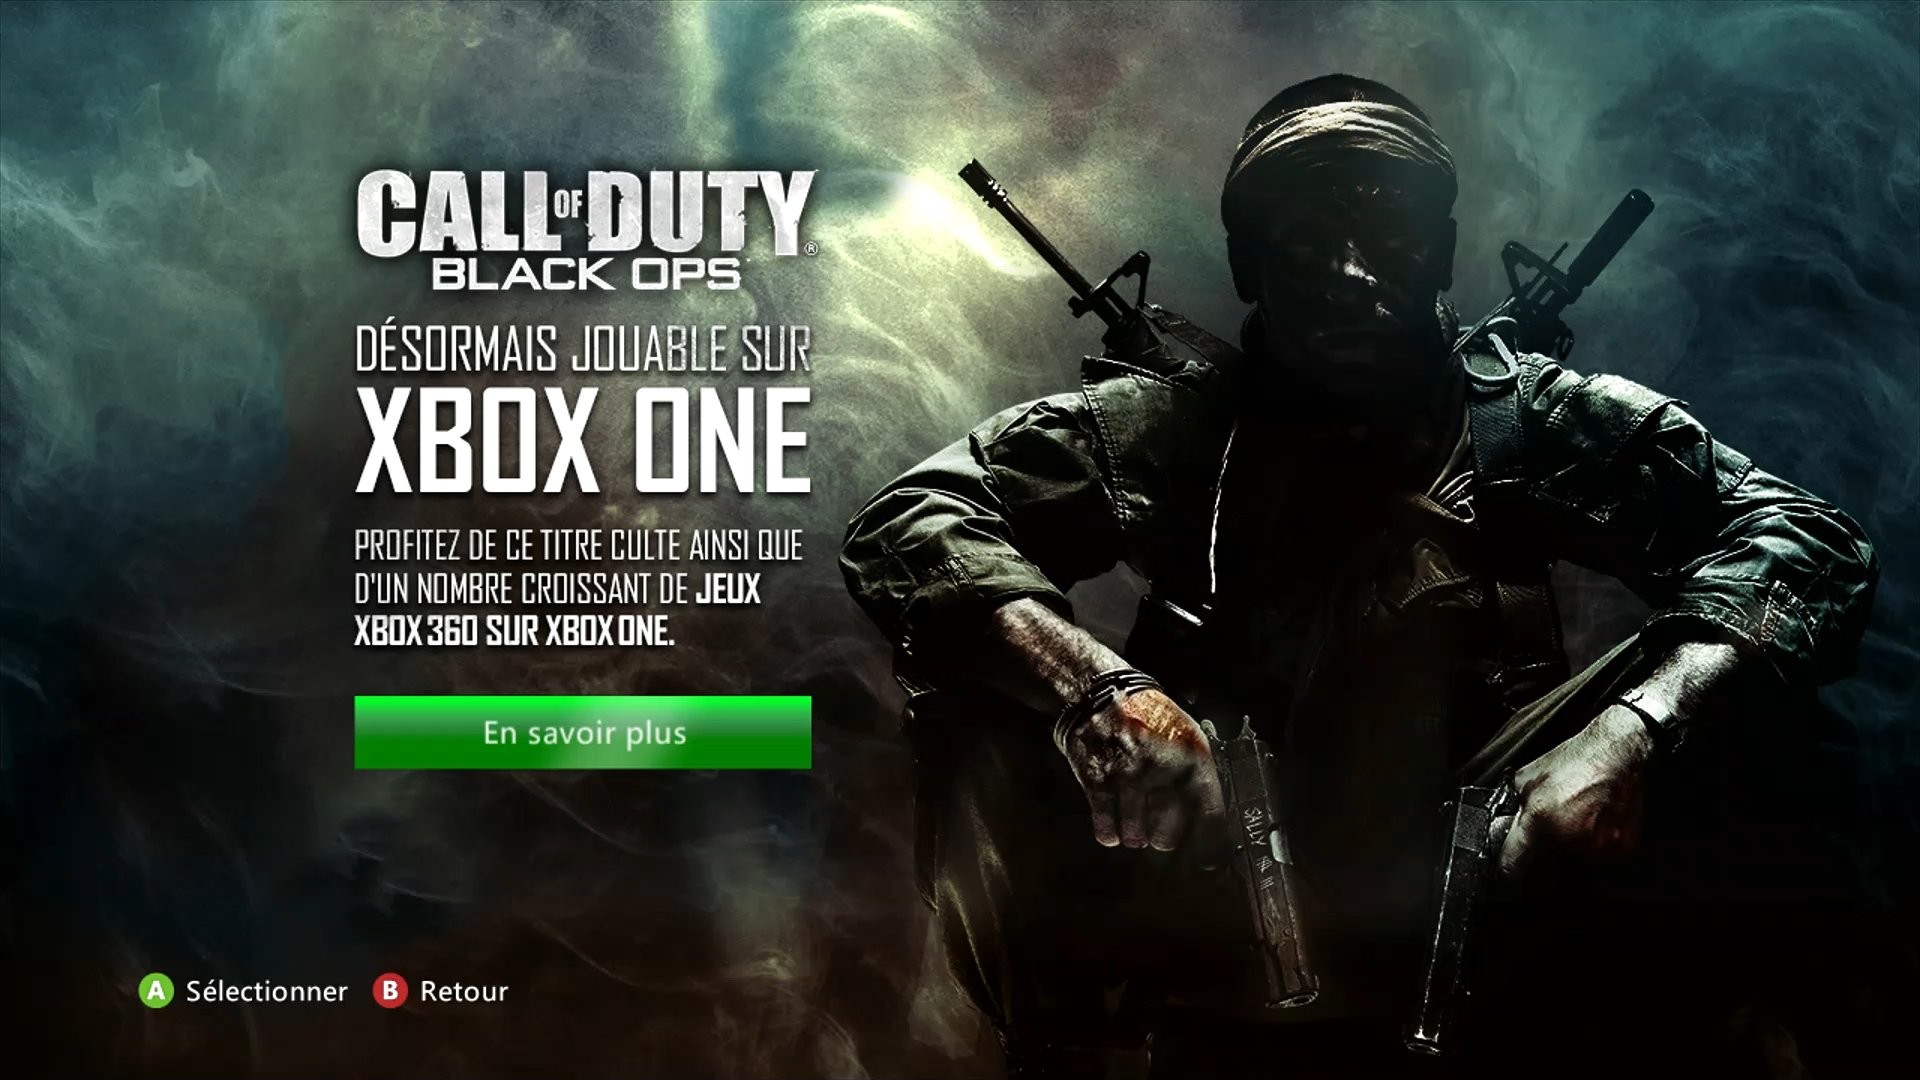 Is Black Ops available for Xbox One?